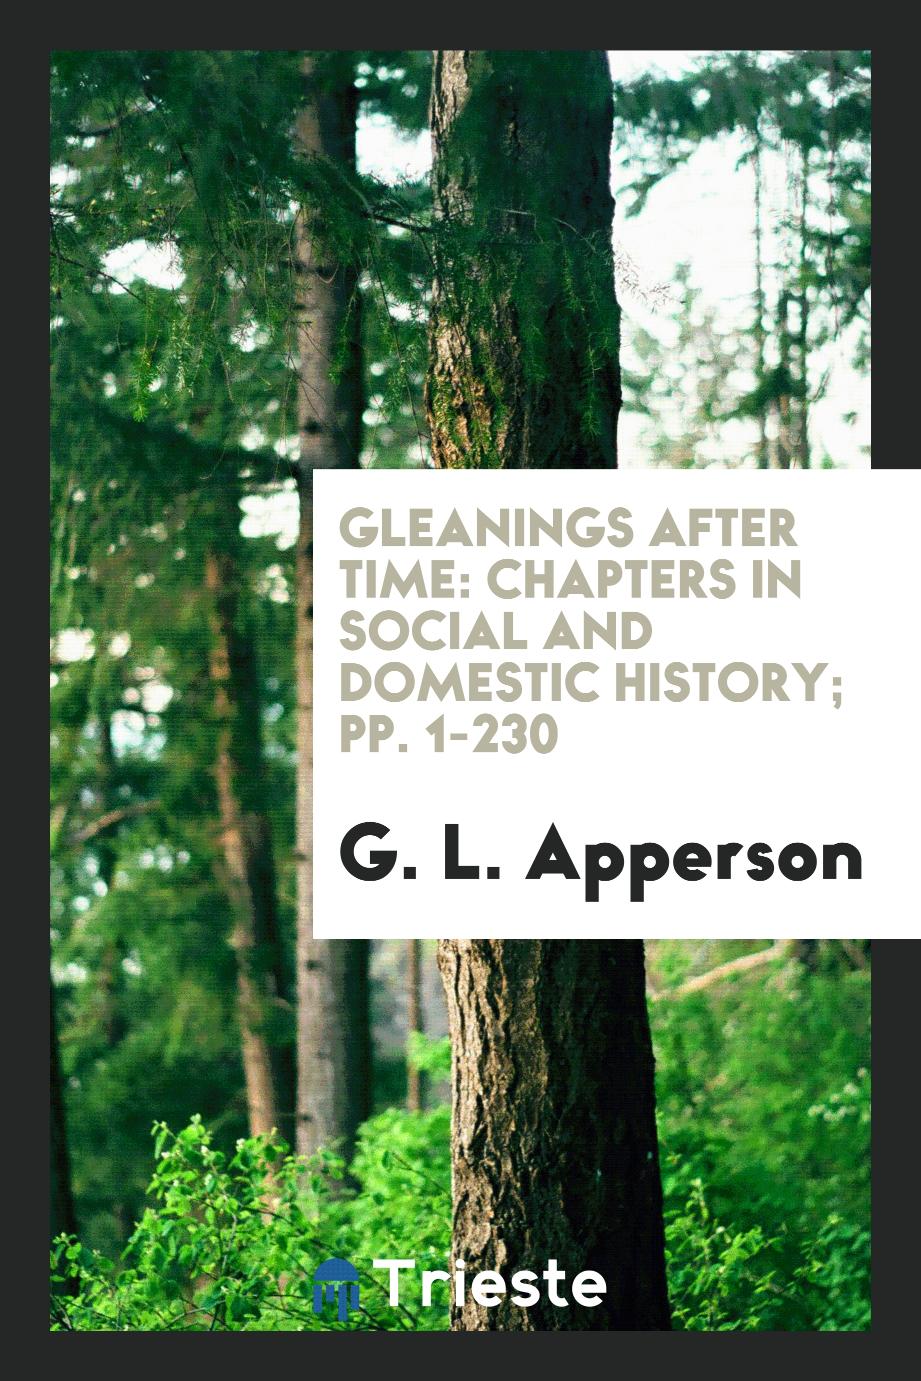 Gleanings After Time: Chapters in Social and Domestic History; pp. 1-230